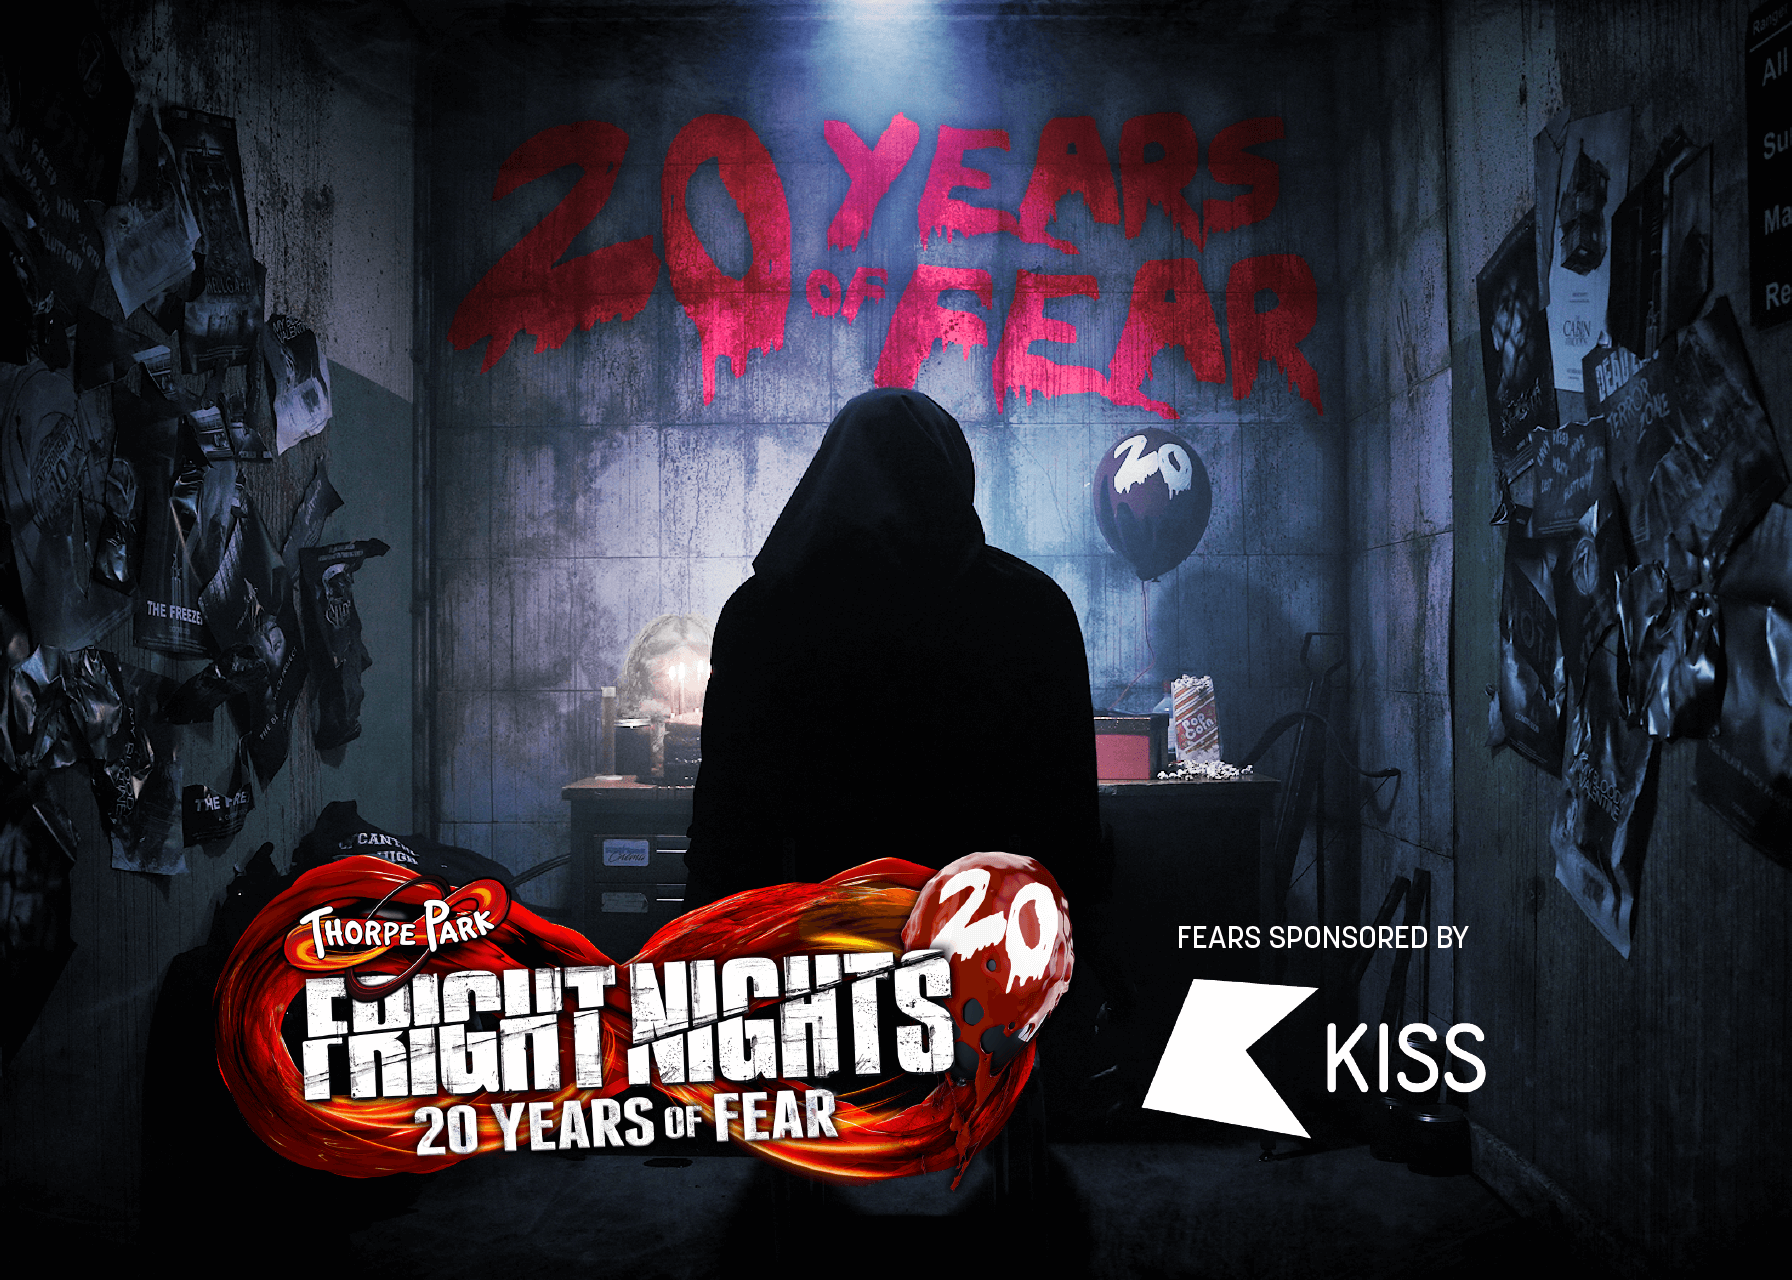 Fright Nights Sponsored By Kiss